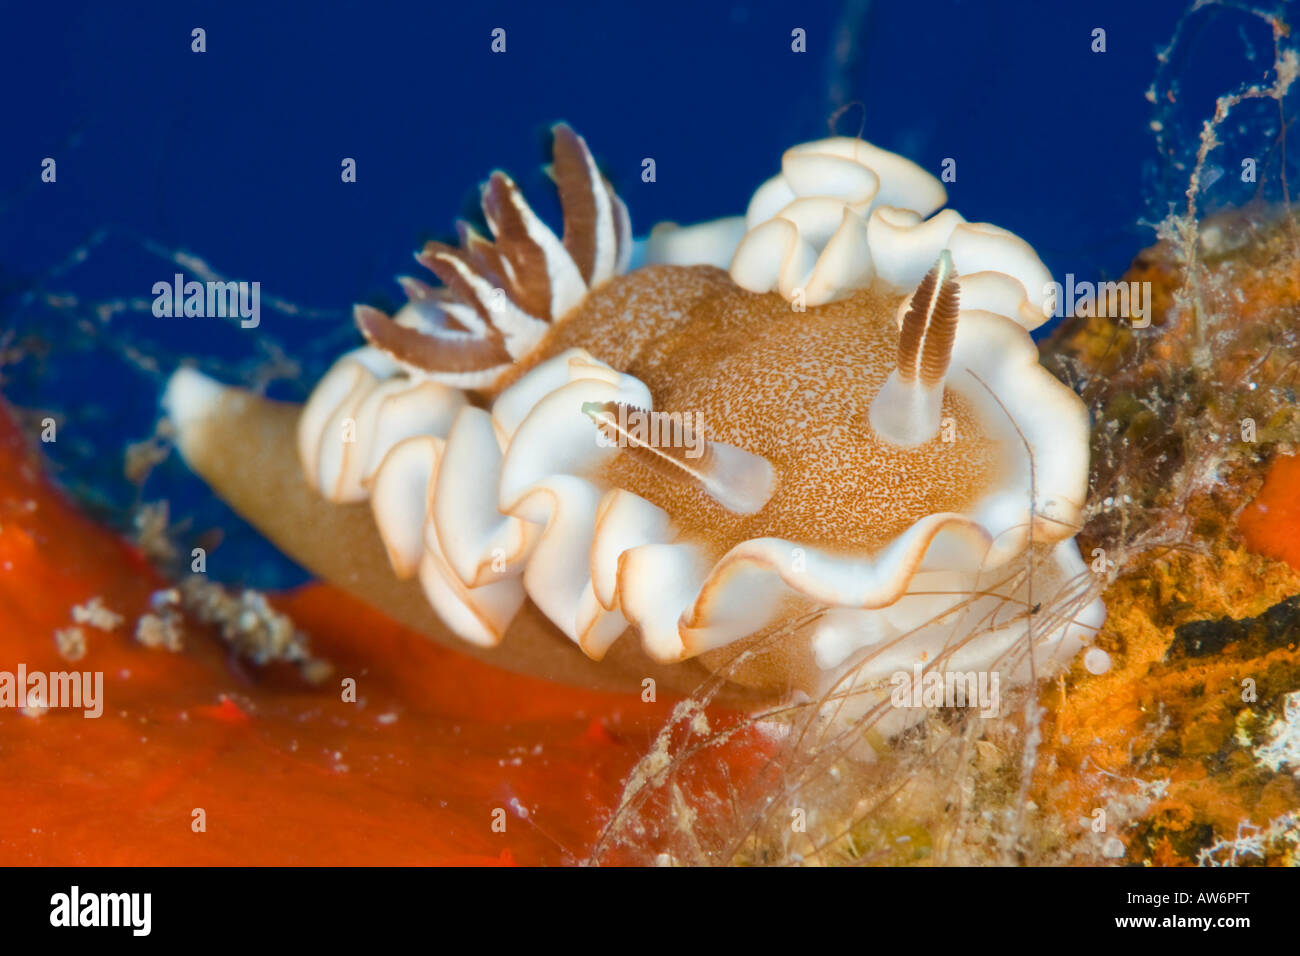 At about one inch in length Glossodoris rufomarginata is one of the most common nudibranches found in Hawaii. Stock Photo